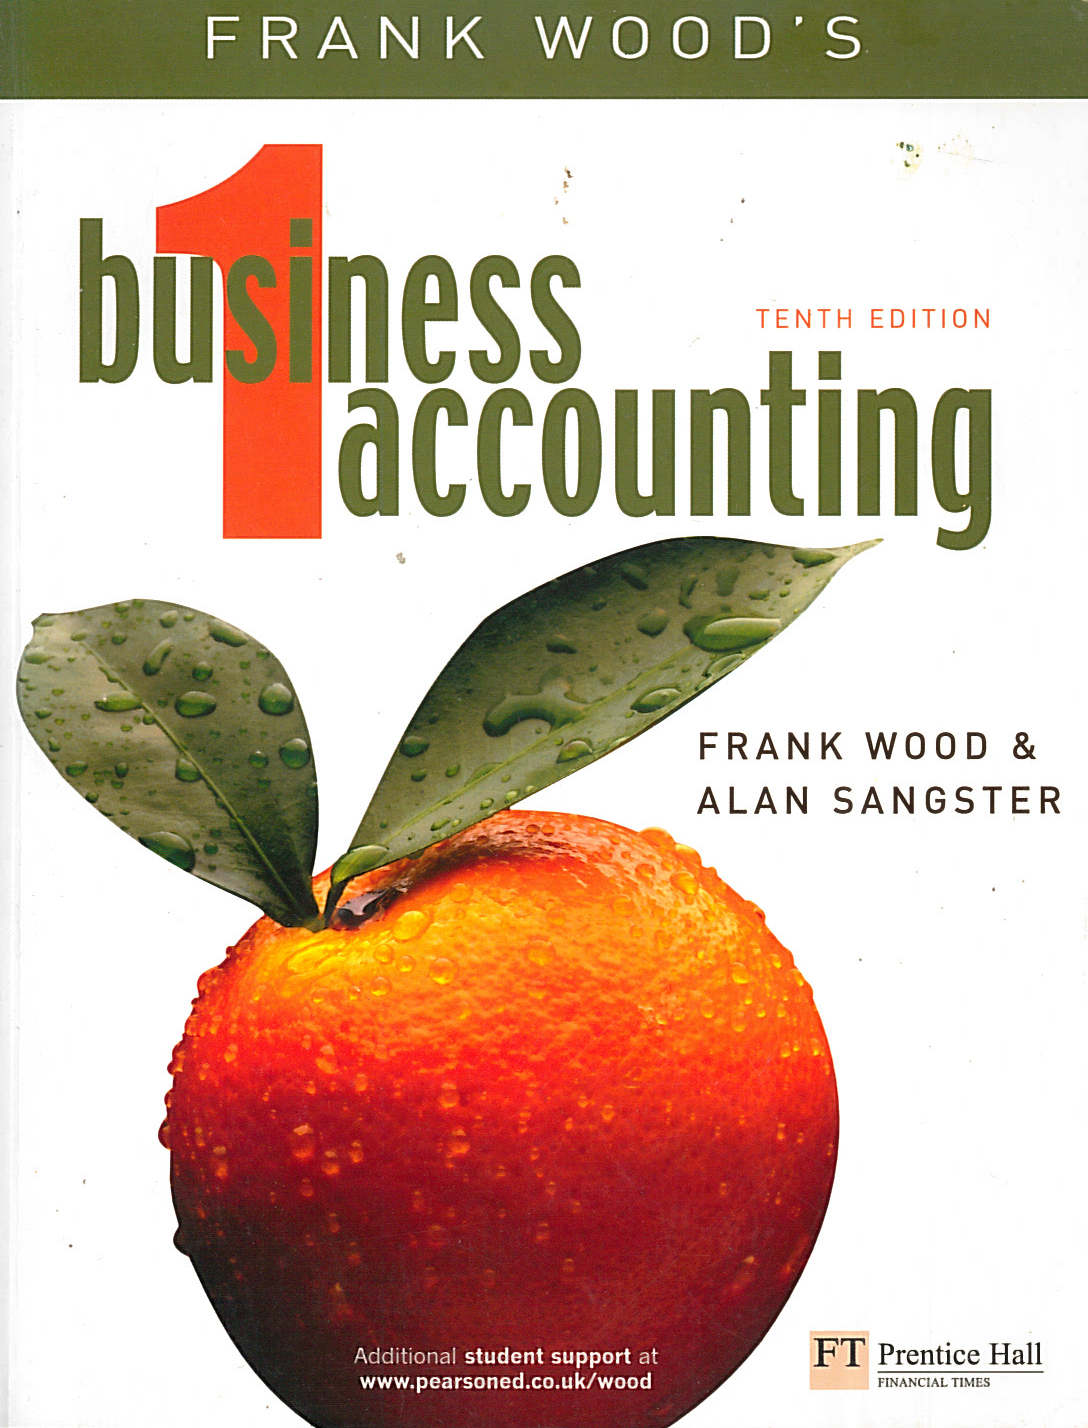 Frank Wood's Business Accounting 1 (Frank Wood, Alan Sangster)